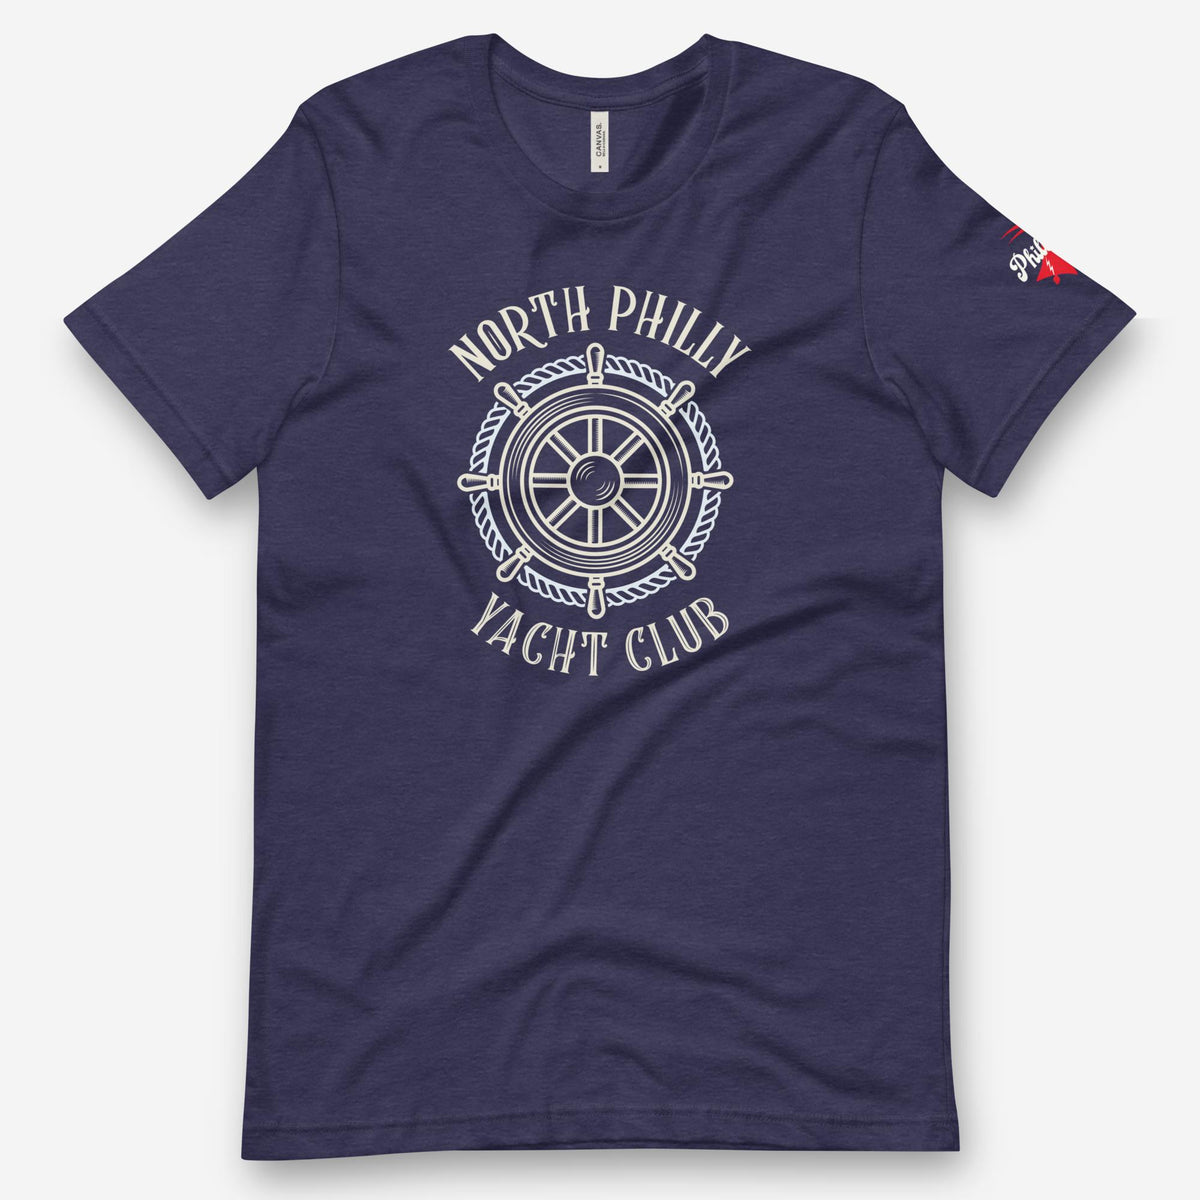 &quot;North Philly Yacht Club&quot; Tee